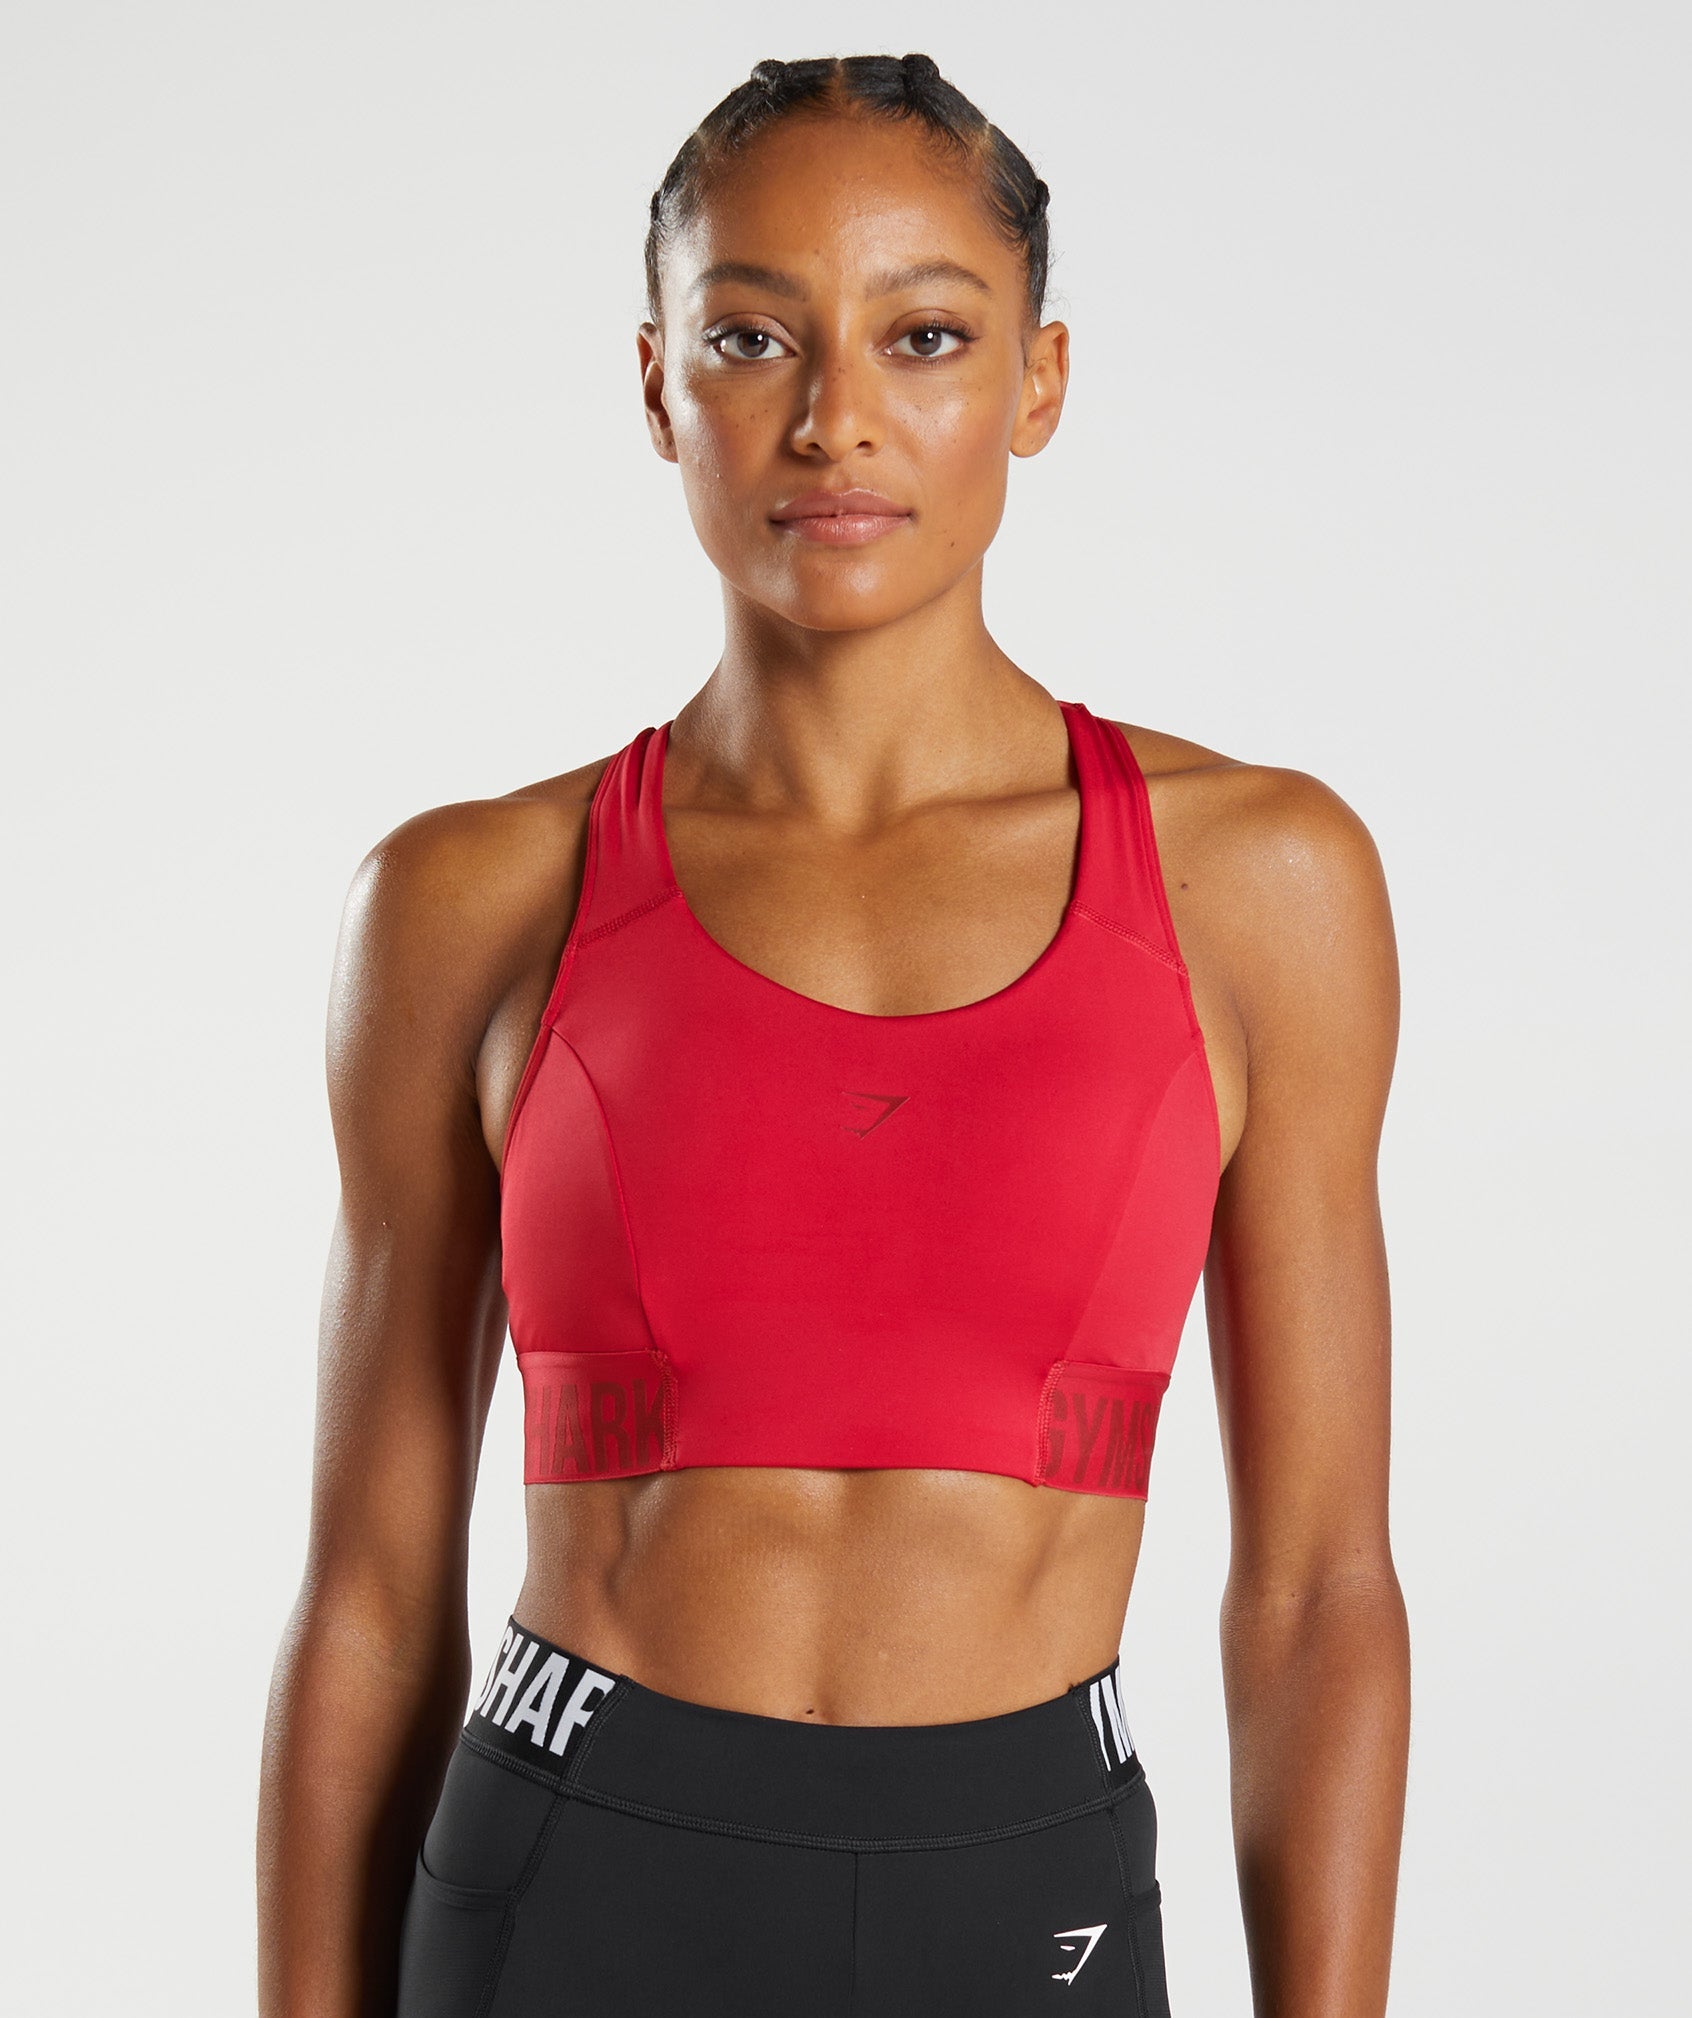 Sexy Red Fitness Sports Bra, Crossfit Bra, Exercise Bustier Top, Workout Breathable  Sports Bra -  Canada